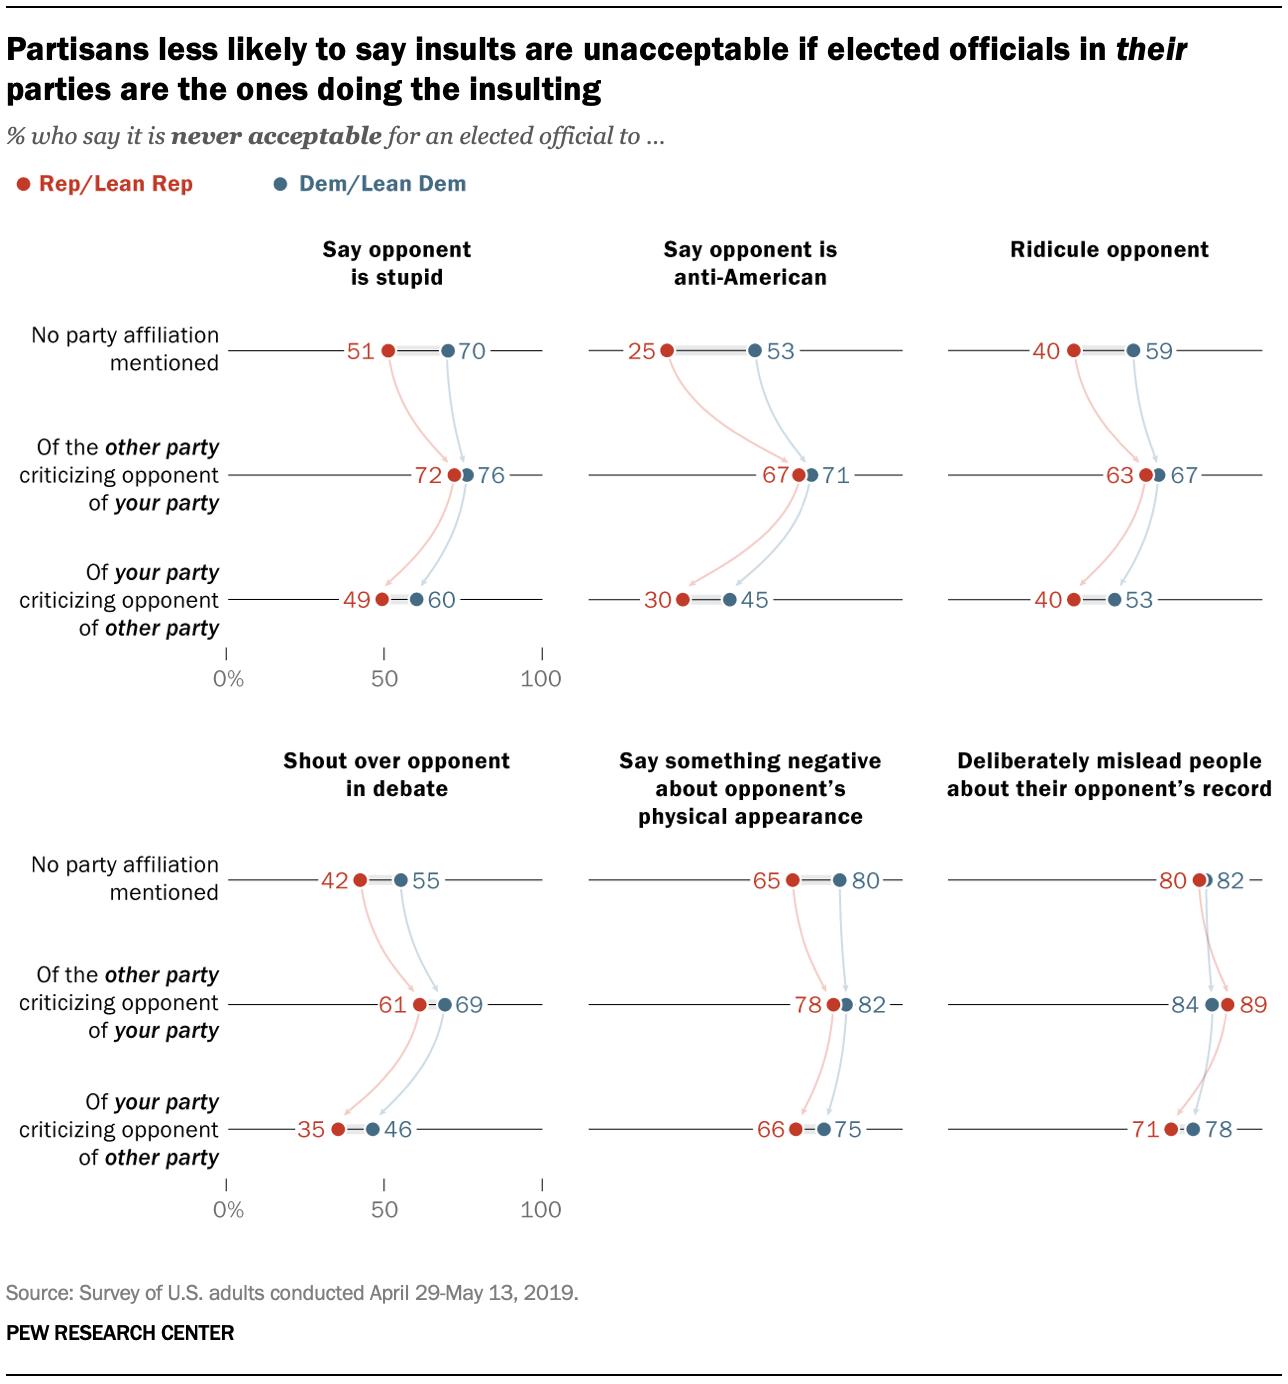 Partisans less likely to say insults are unacceptable if elected officials in their parties are the ones doing the insulting